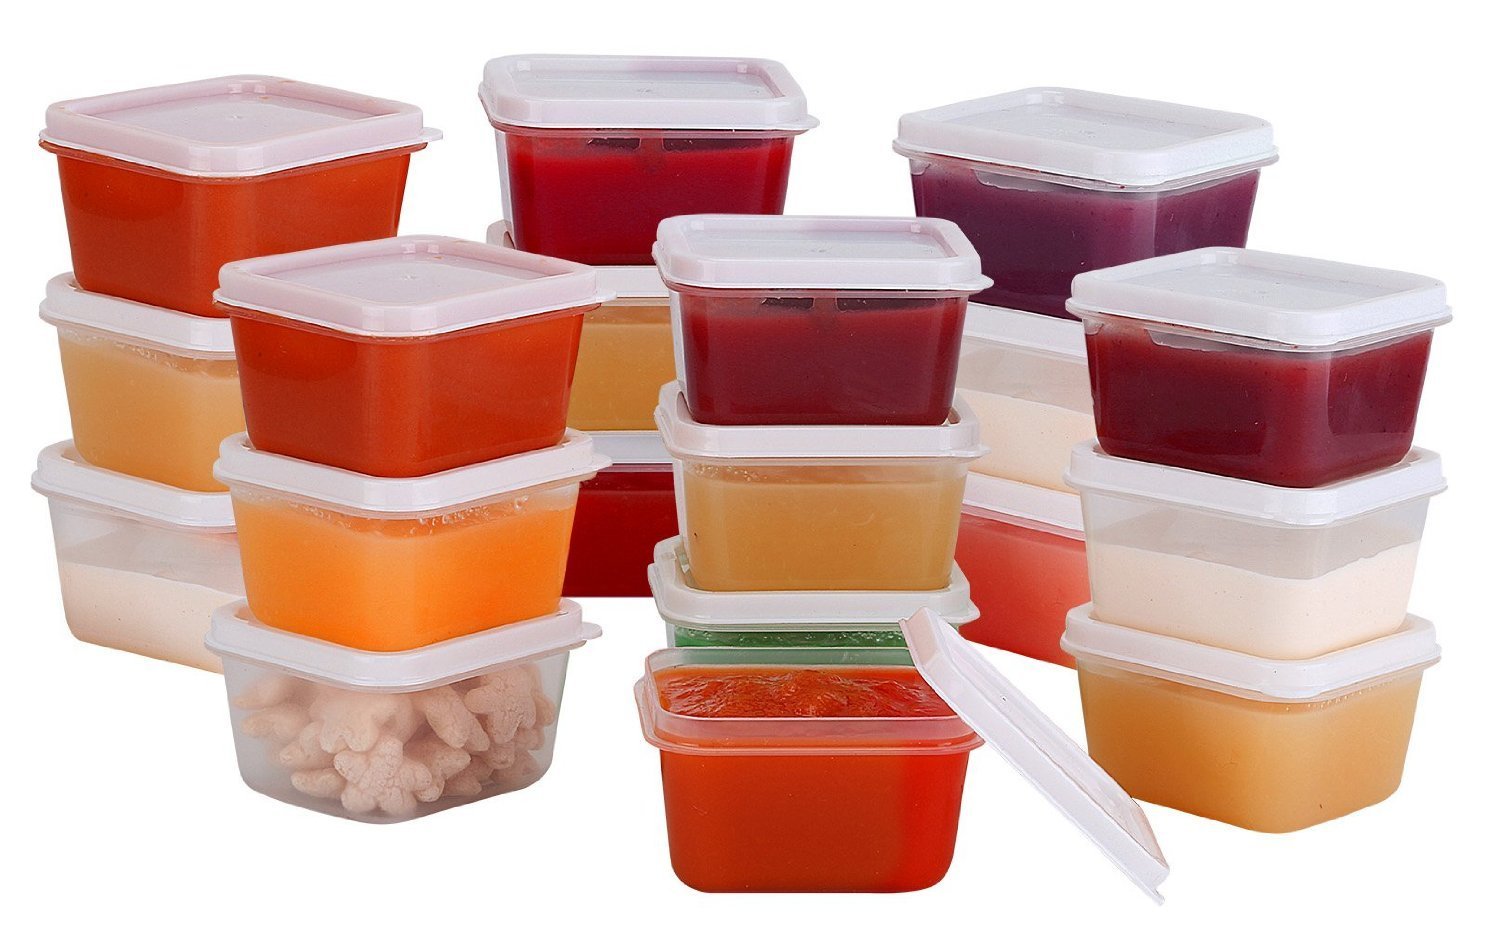 20ct. Mini Food Storage Containers $5.98